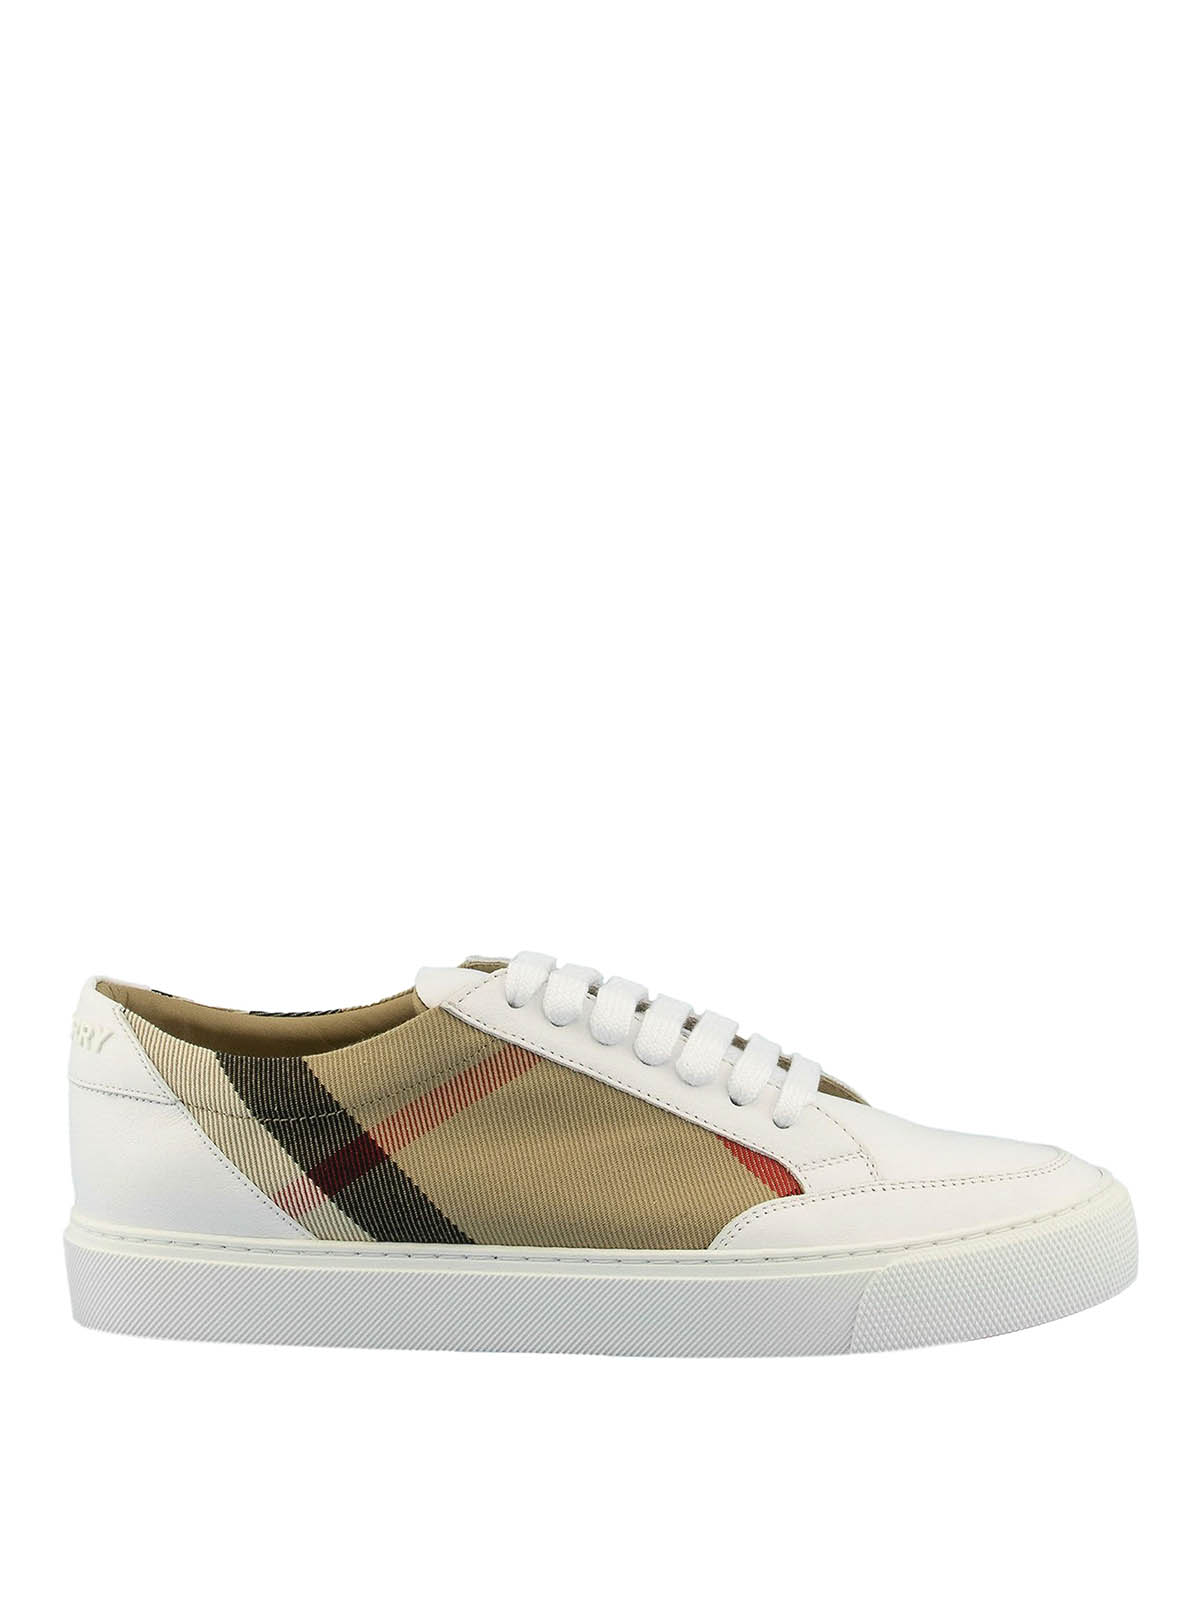 Trainers Burberry - New Salmond leather and cotton sneakers - 8024326